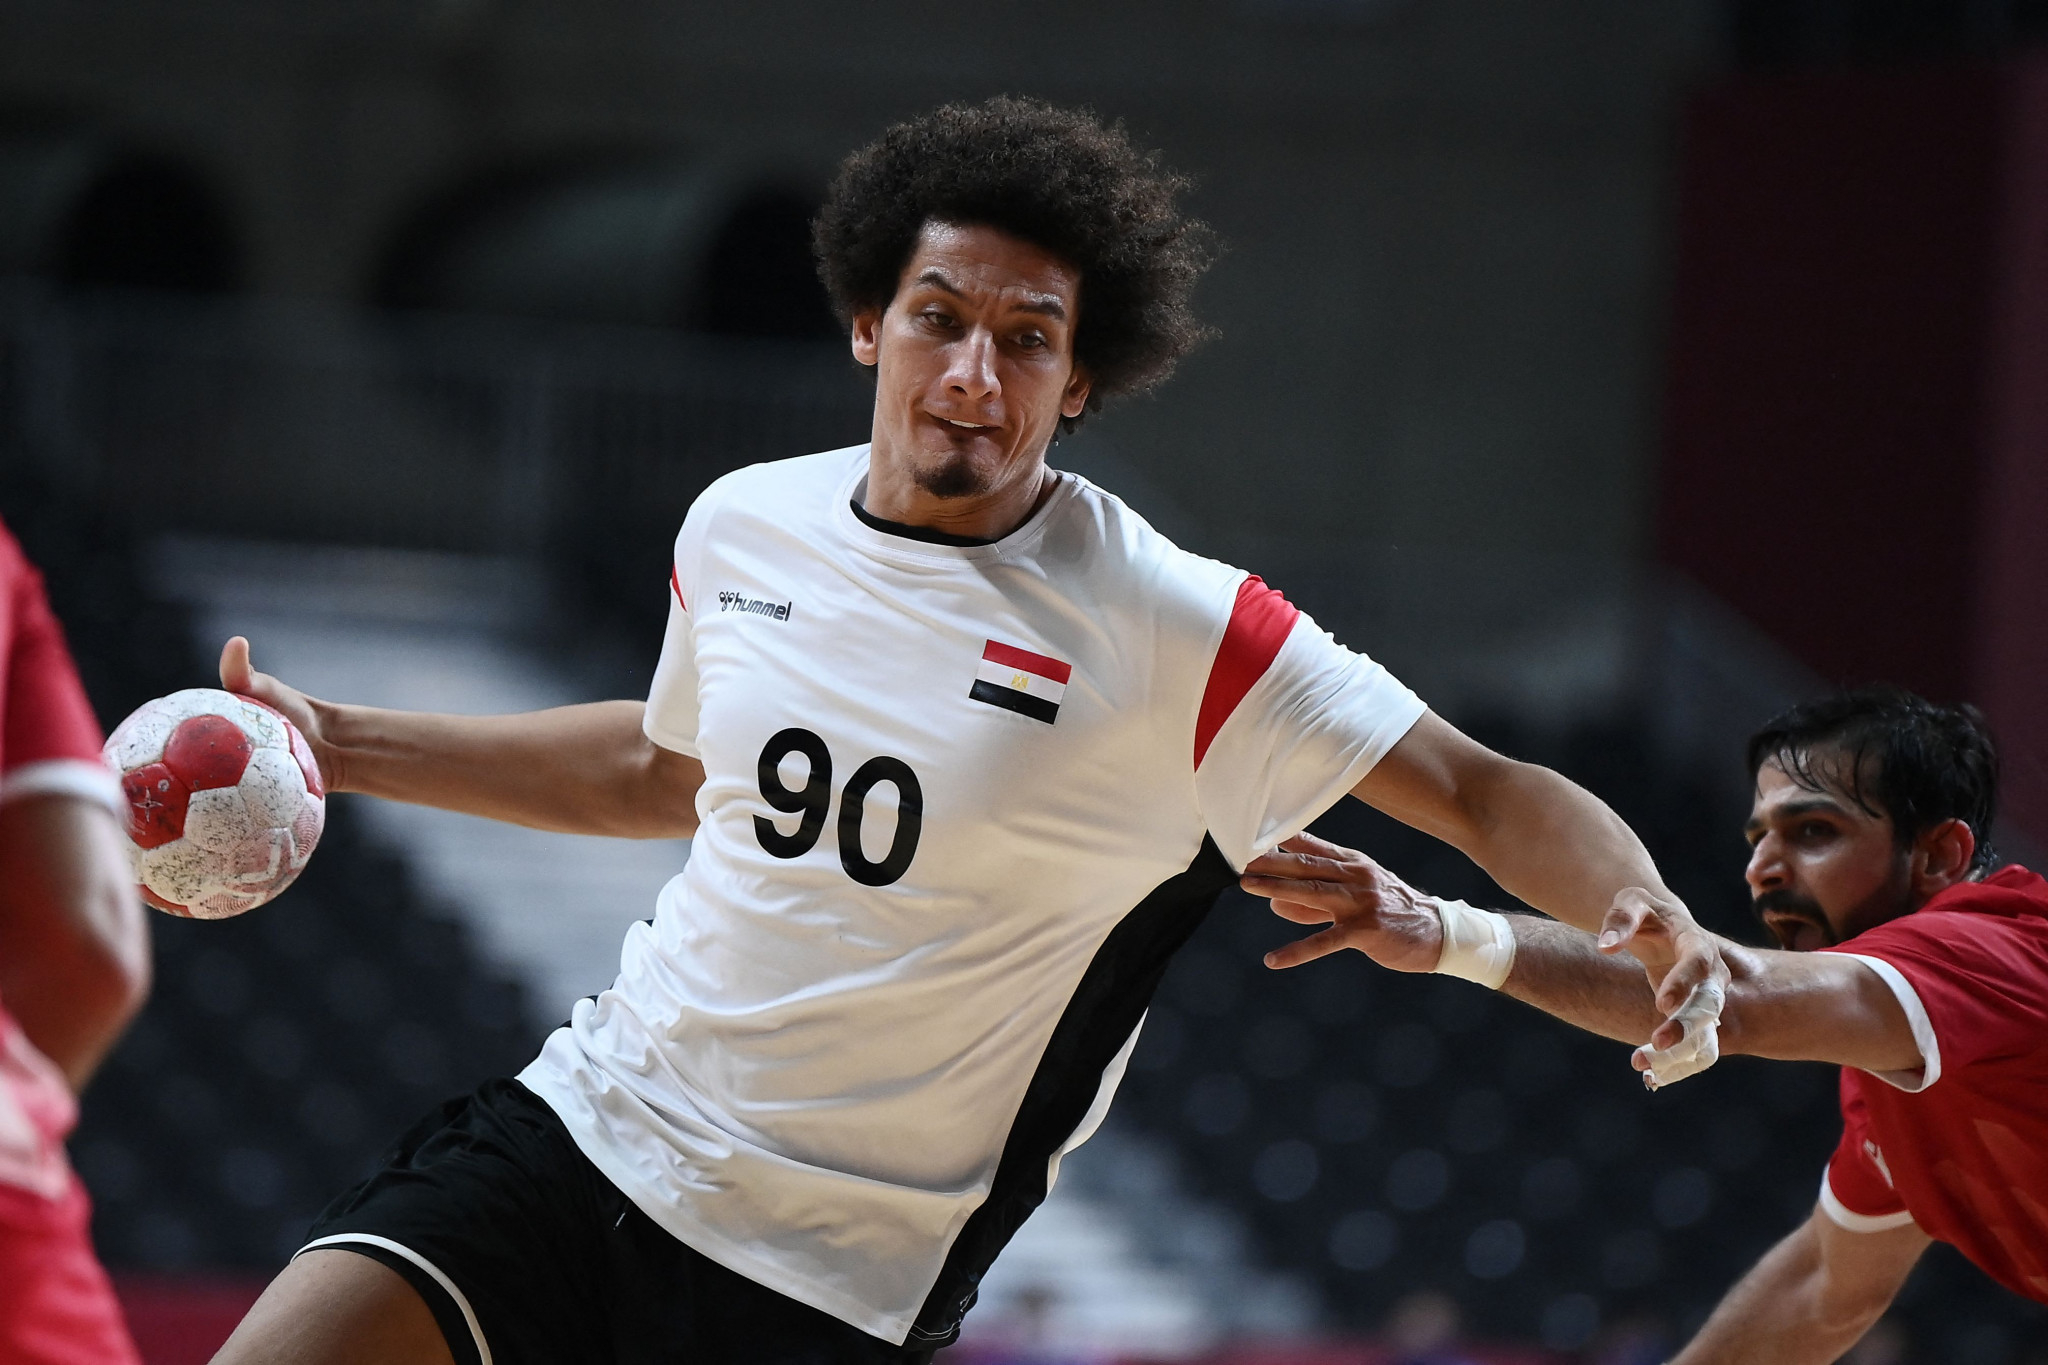 Egypt is set to defend its title as it hosts the African Men's Handball Championship ©Getty Images